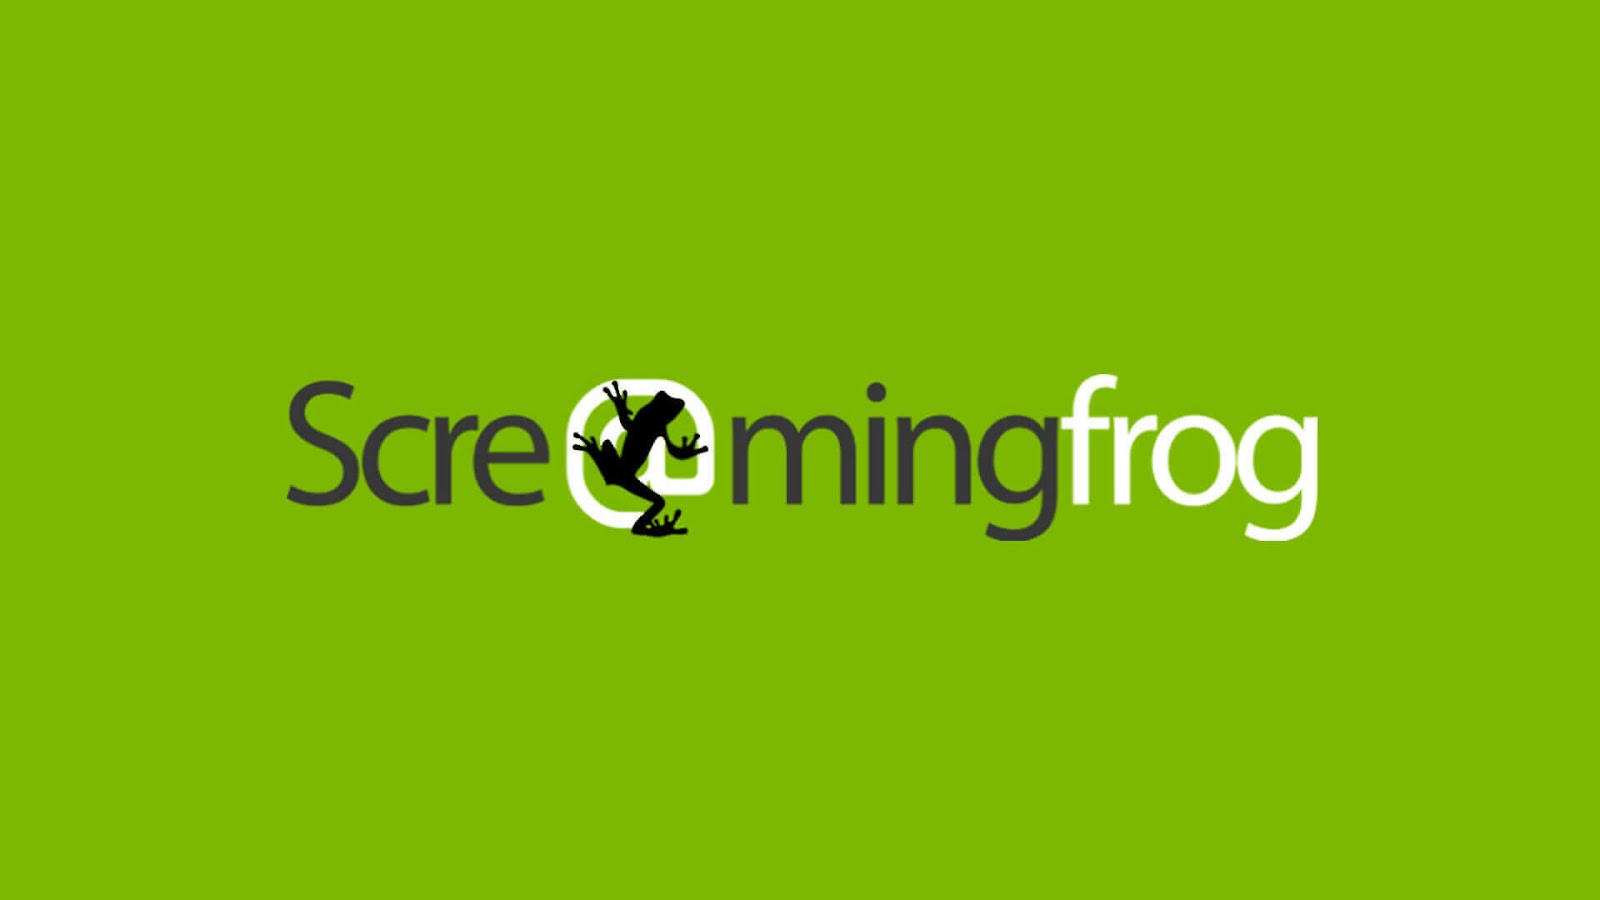 Screaming Frog releases SEO Spider version 12.0